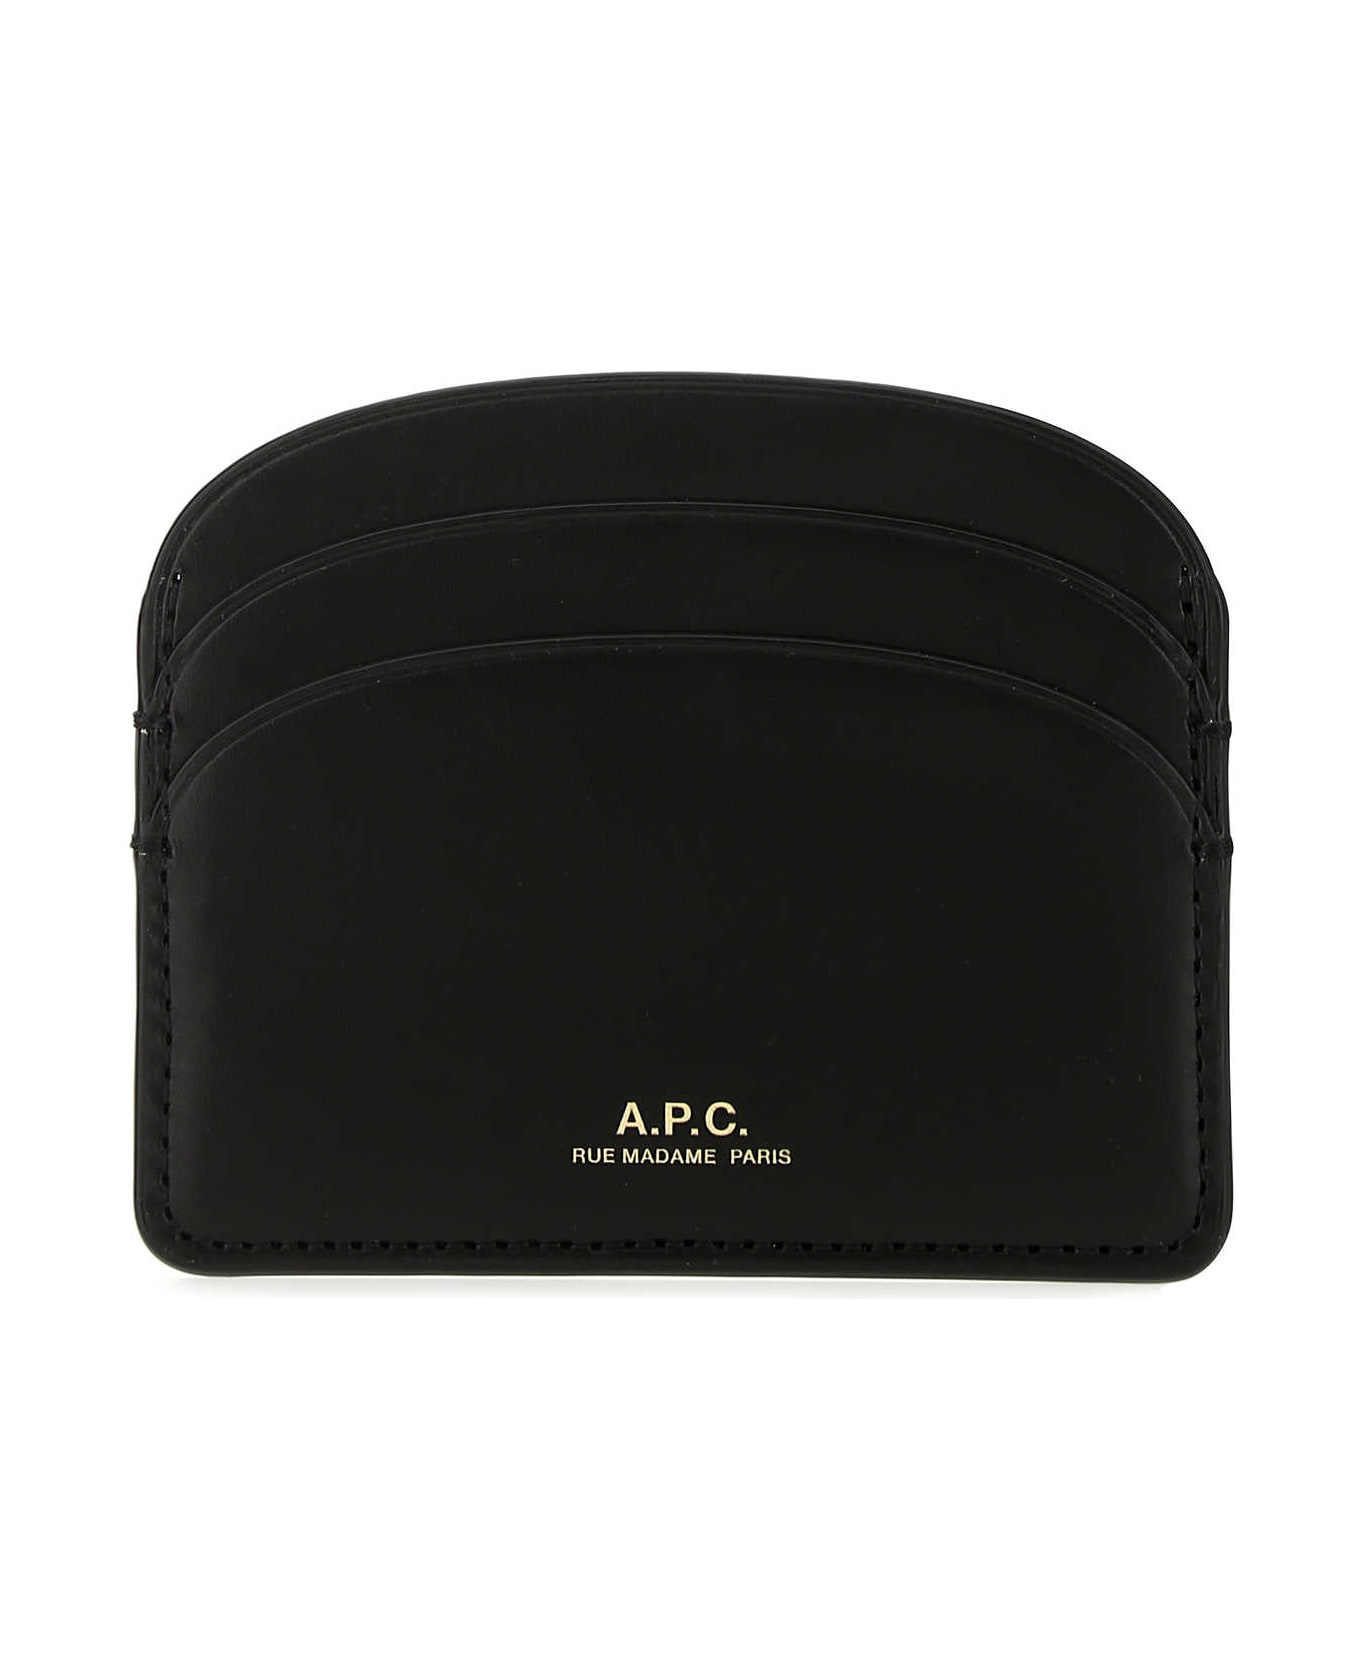 A.P.C. Black Leather Card Holder - LZZ